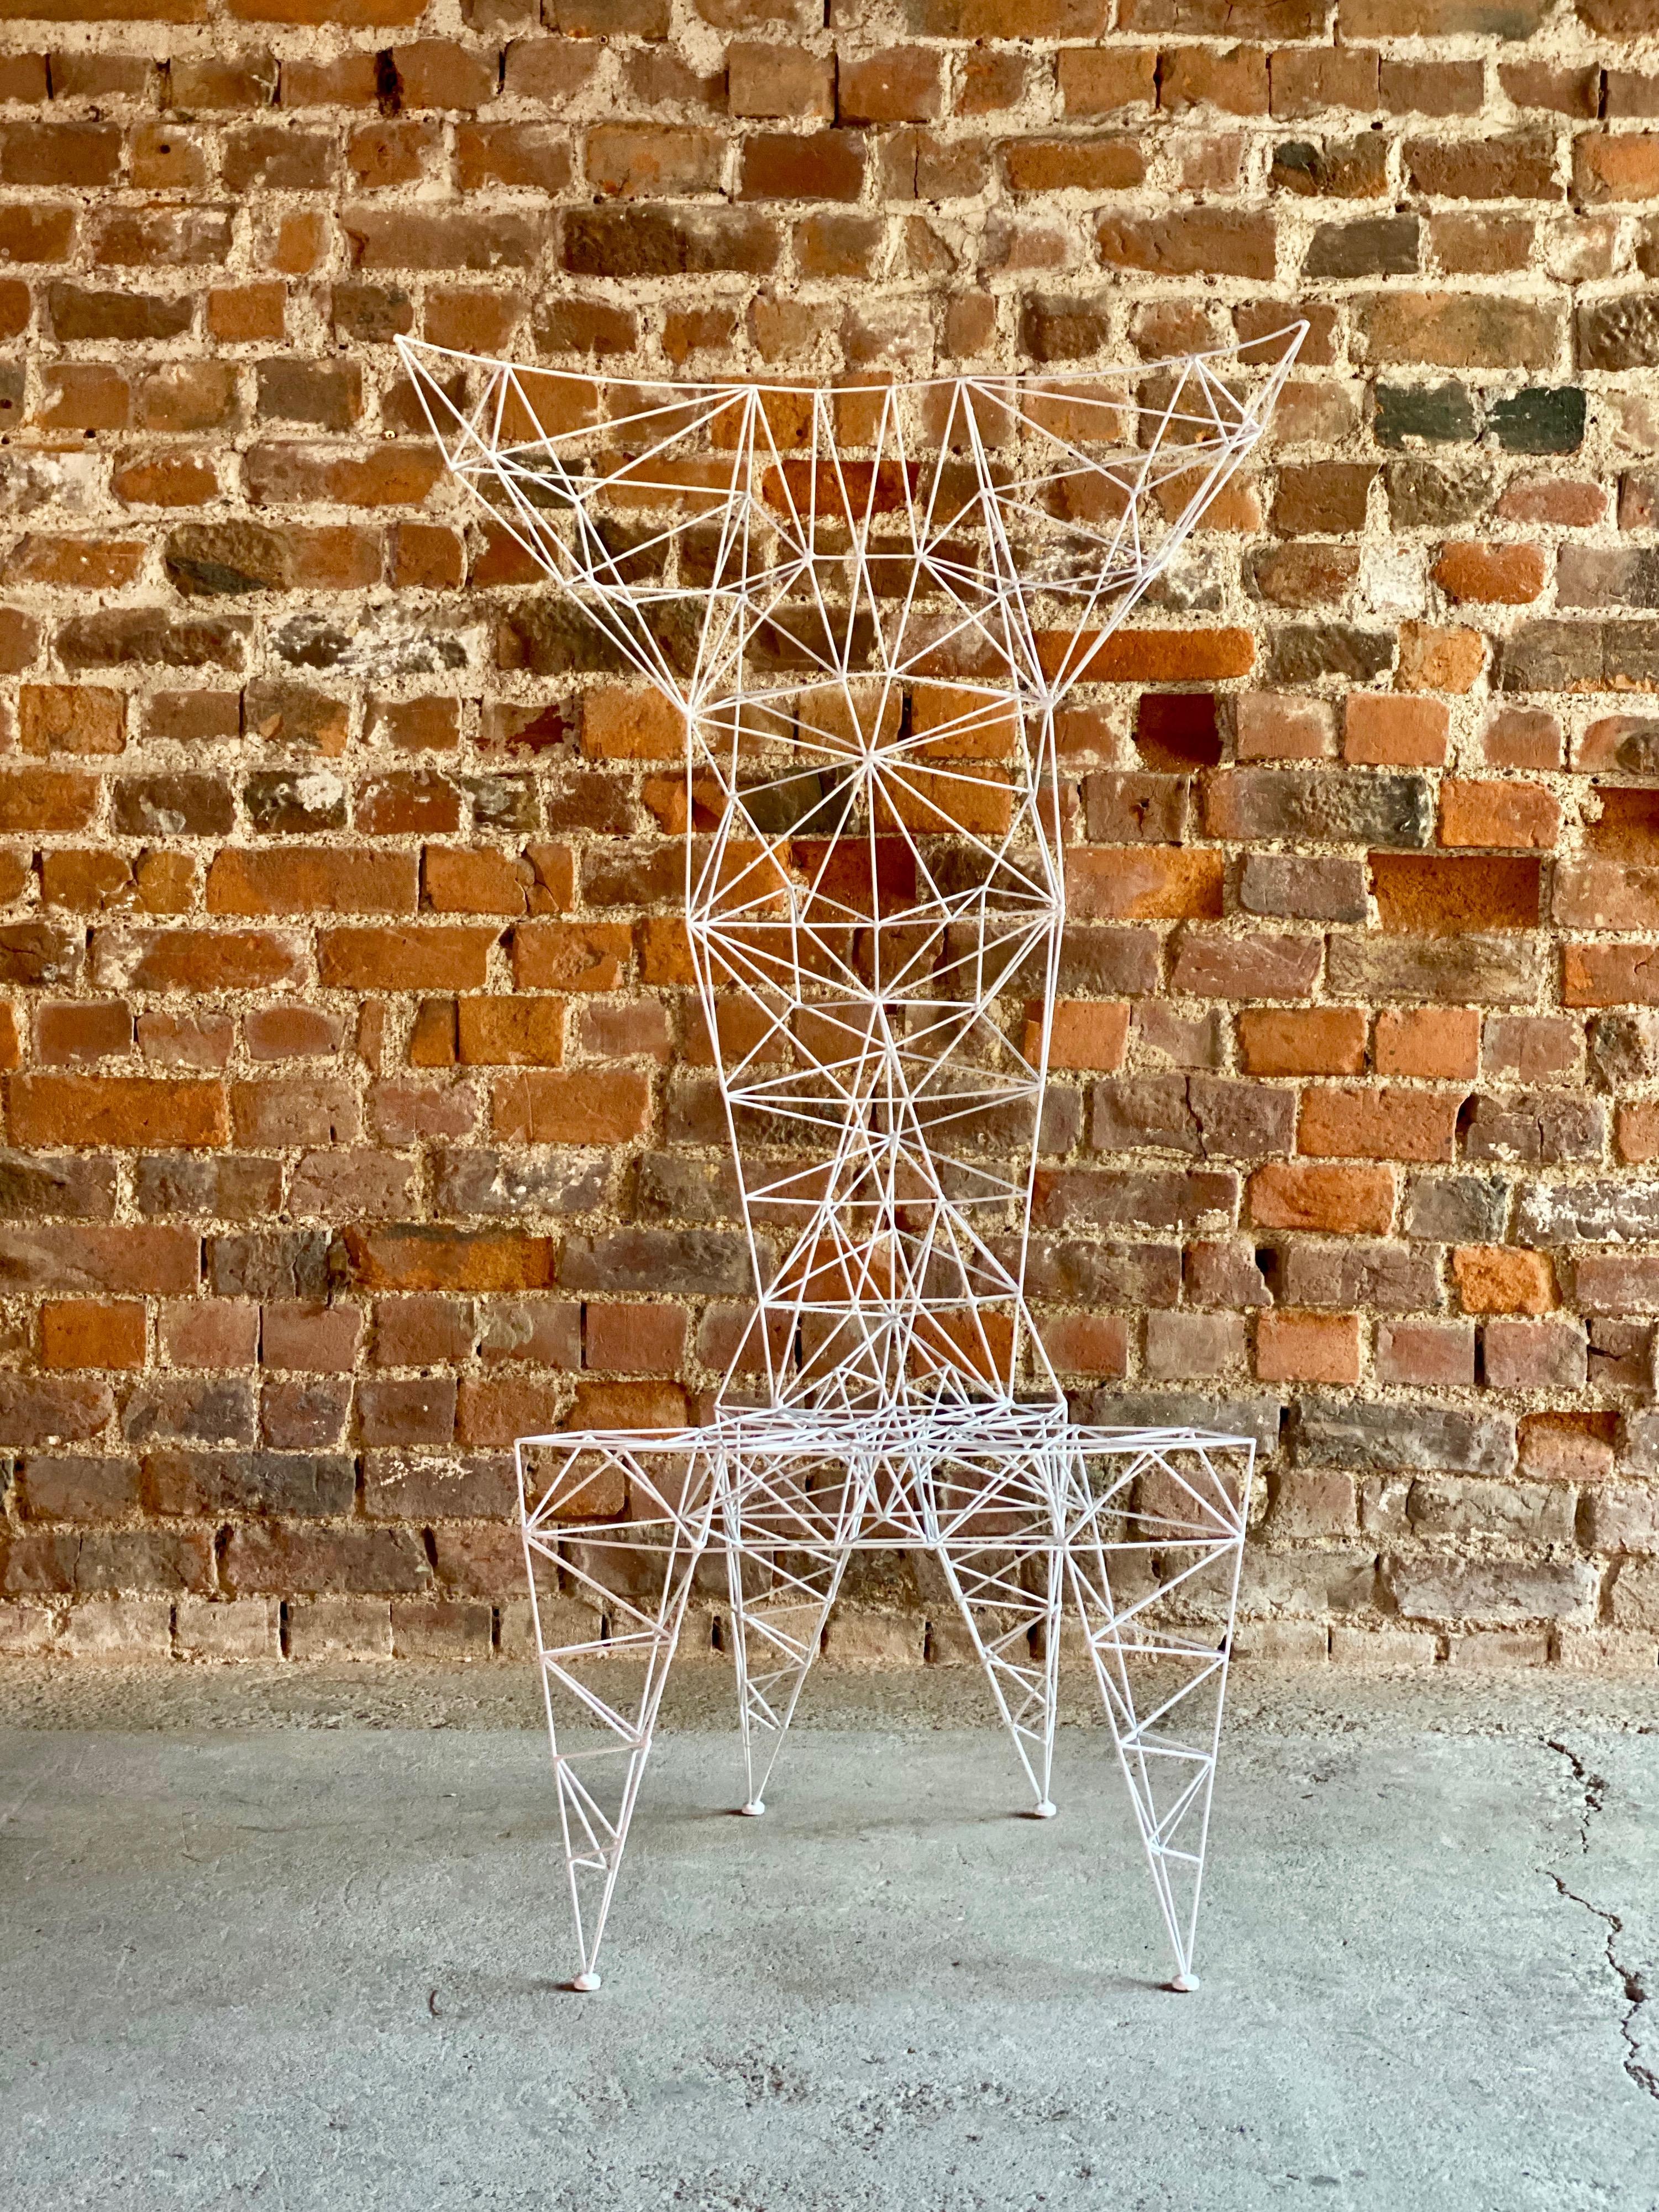 Tom Dixon Pylon Chair Designed in 1991 British Design

Tom Dixon Pylon chair designed in 1991, triangulated steel rods with white powder-coated finish a modern day masterpiece. 

Originally created on a self-propelled mission to design the